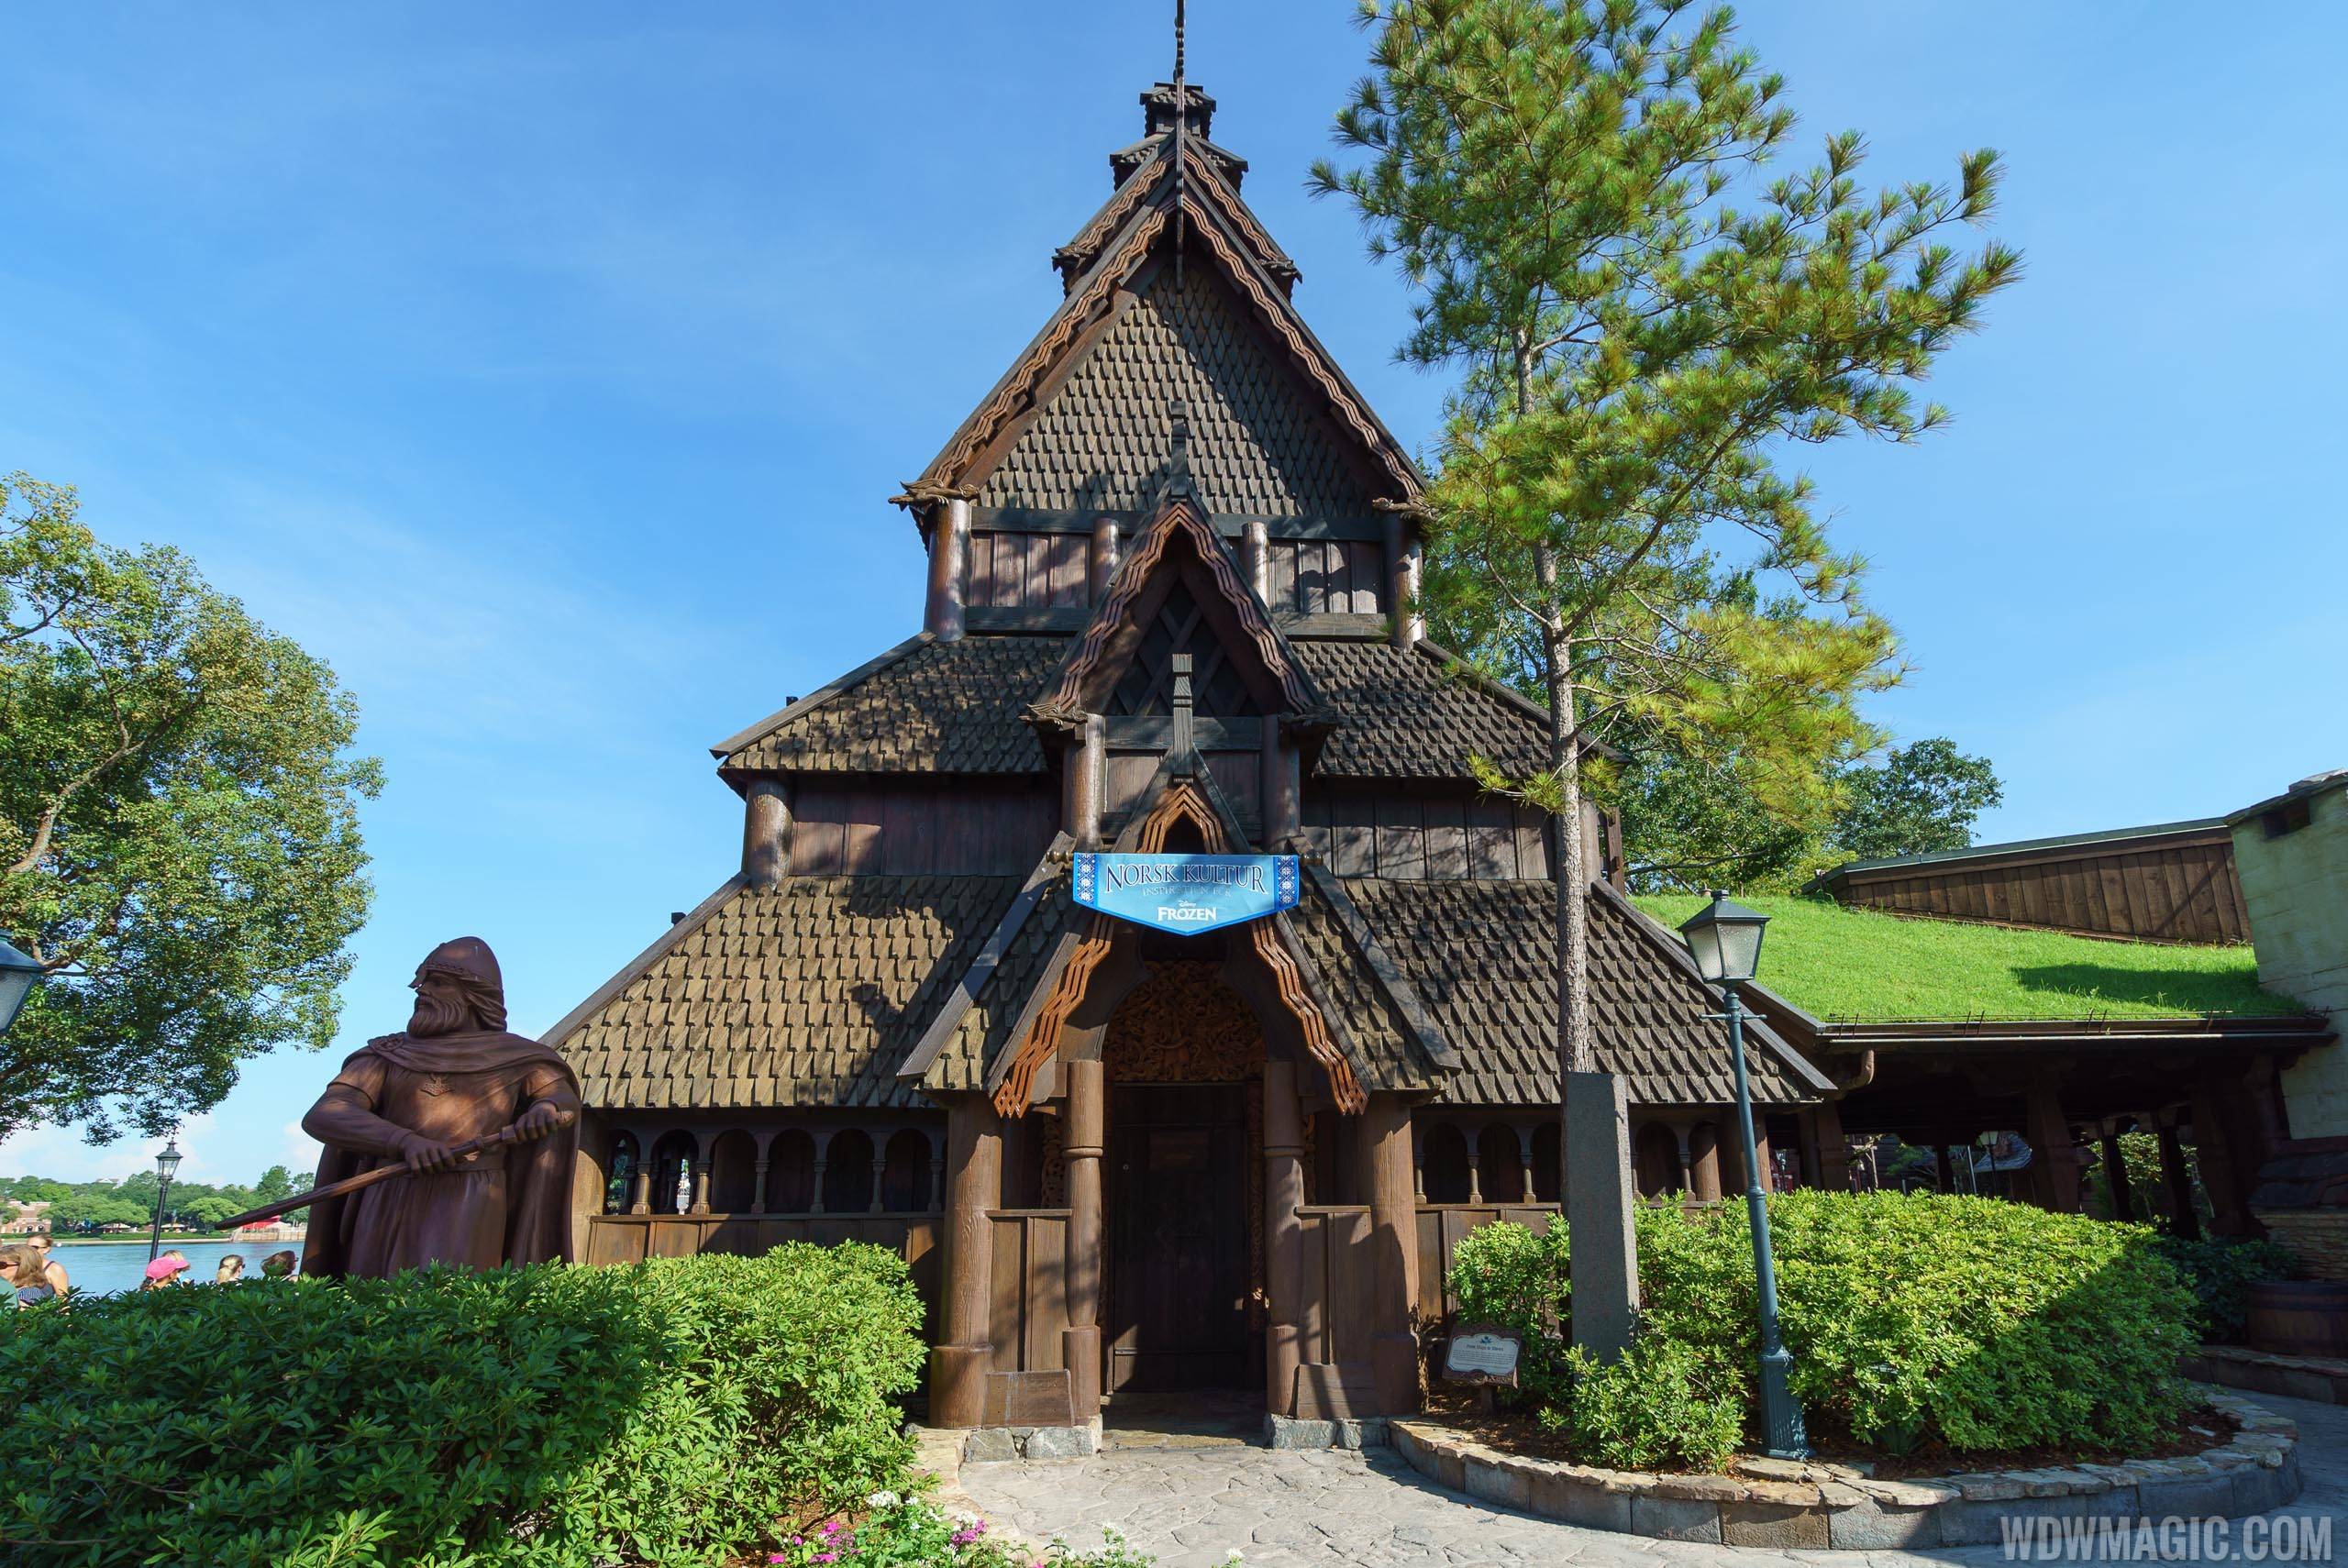 PHOTOS - A look at the Norway Pavilion's Stave Church exhibit